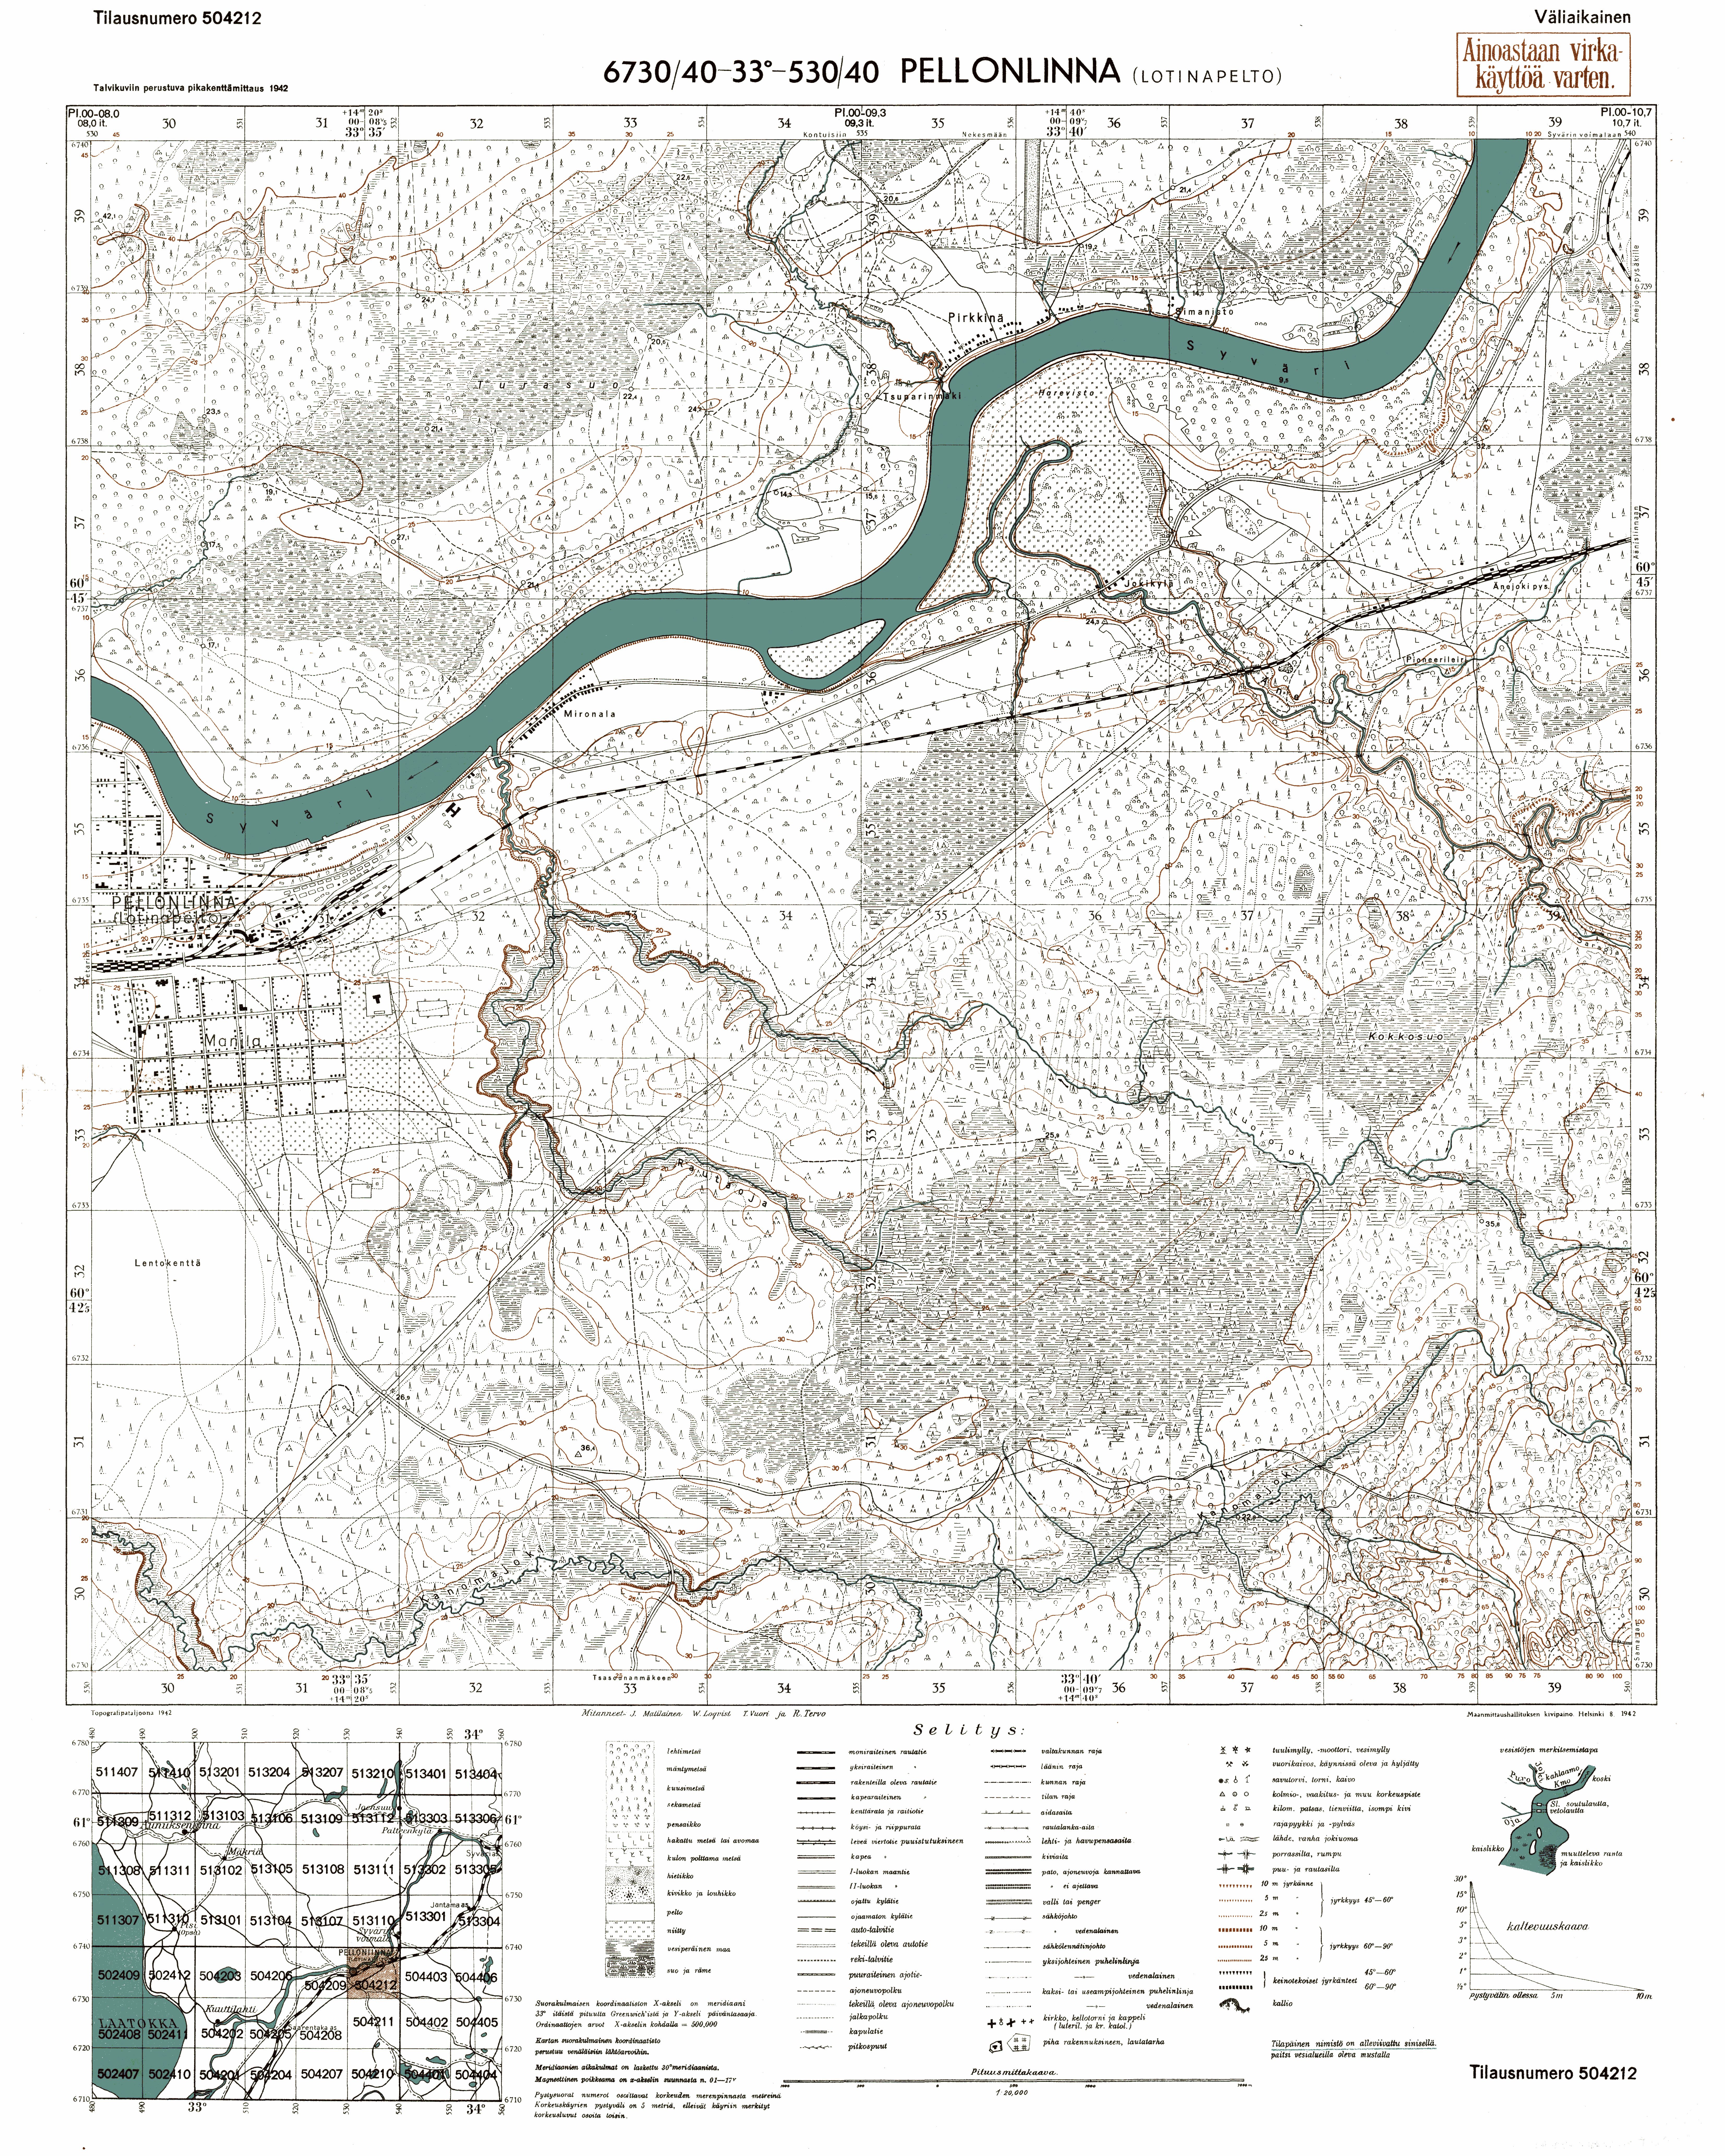 Lodeinoje Pole. Pellonlinna. Topografikartta 504212. Topographic map from 1942. Use the zooming tool to explore in higher level of detail. Obtain as a quality print or high resolution image